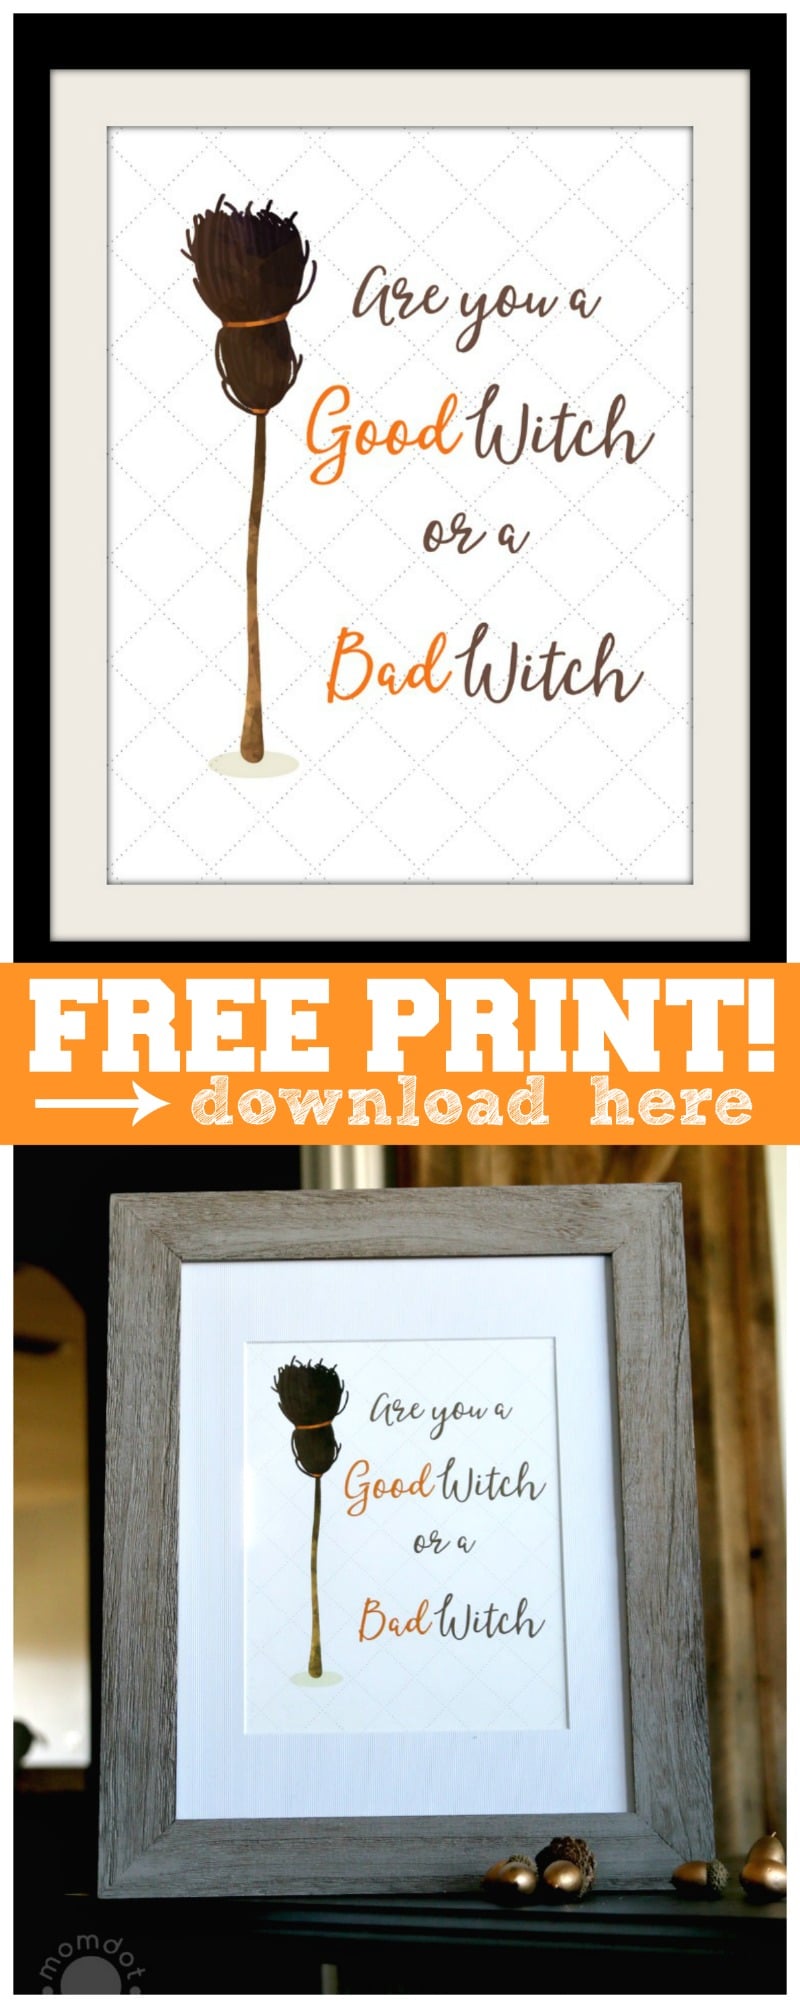 Free Halloween Print (free download printable) - simply print on cardstock and put in frame for instant cost free Halloween decor! 